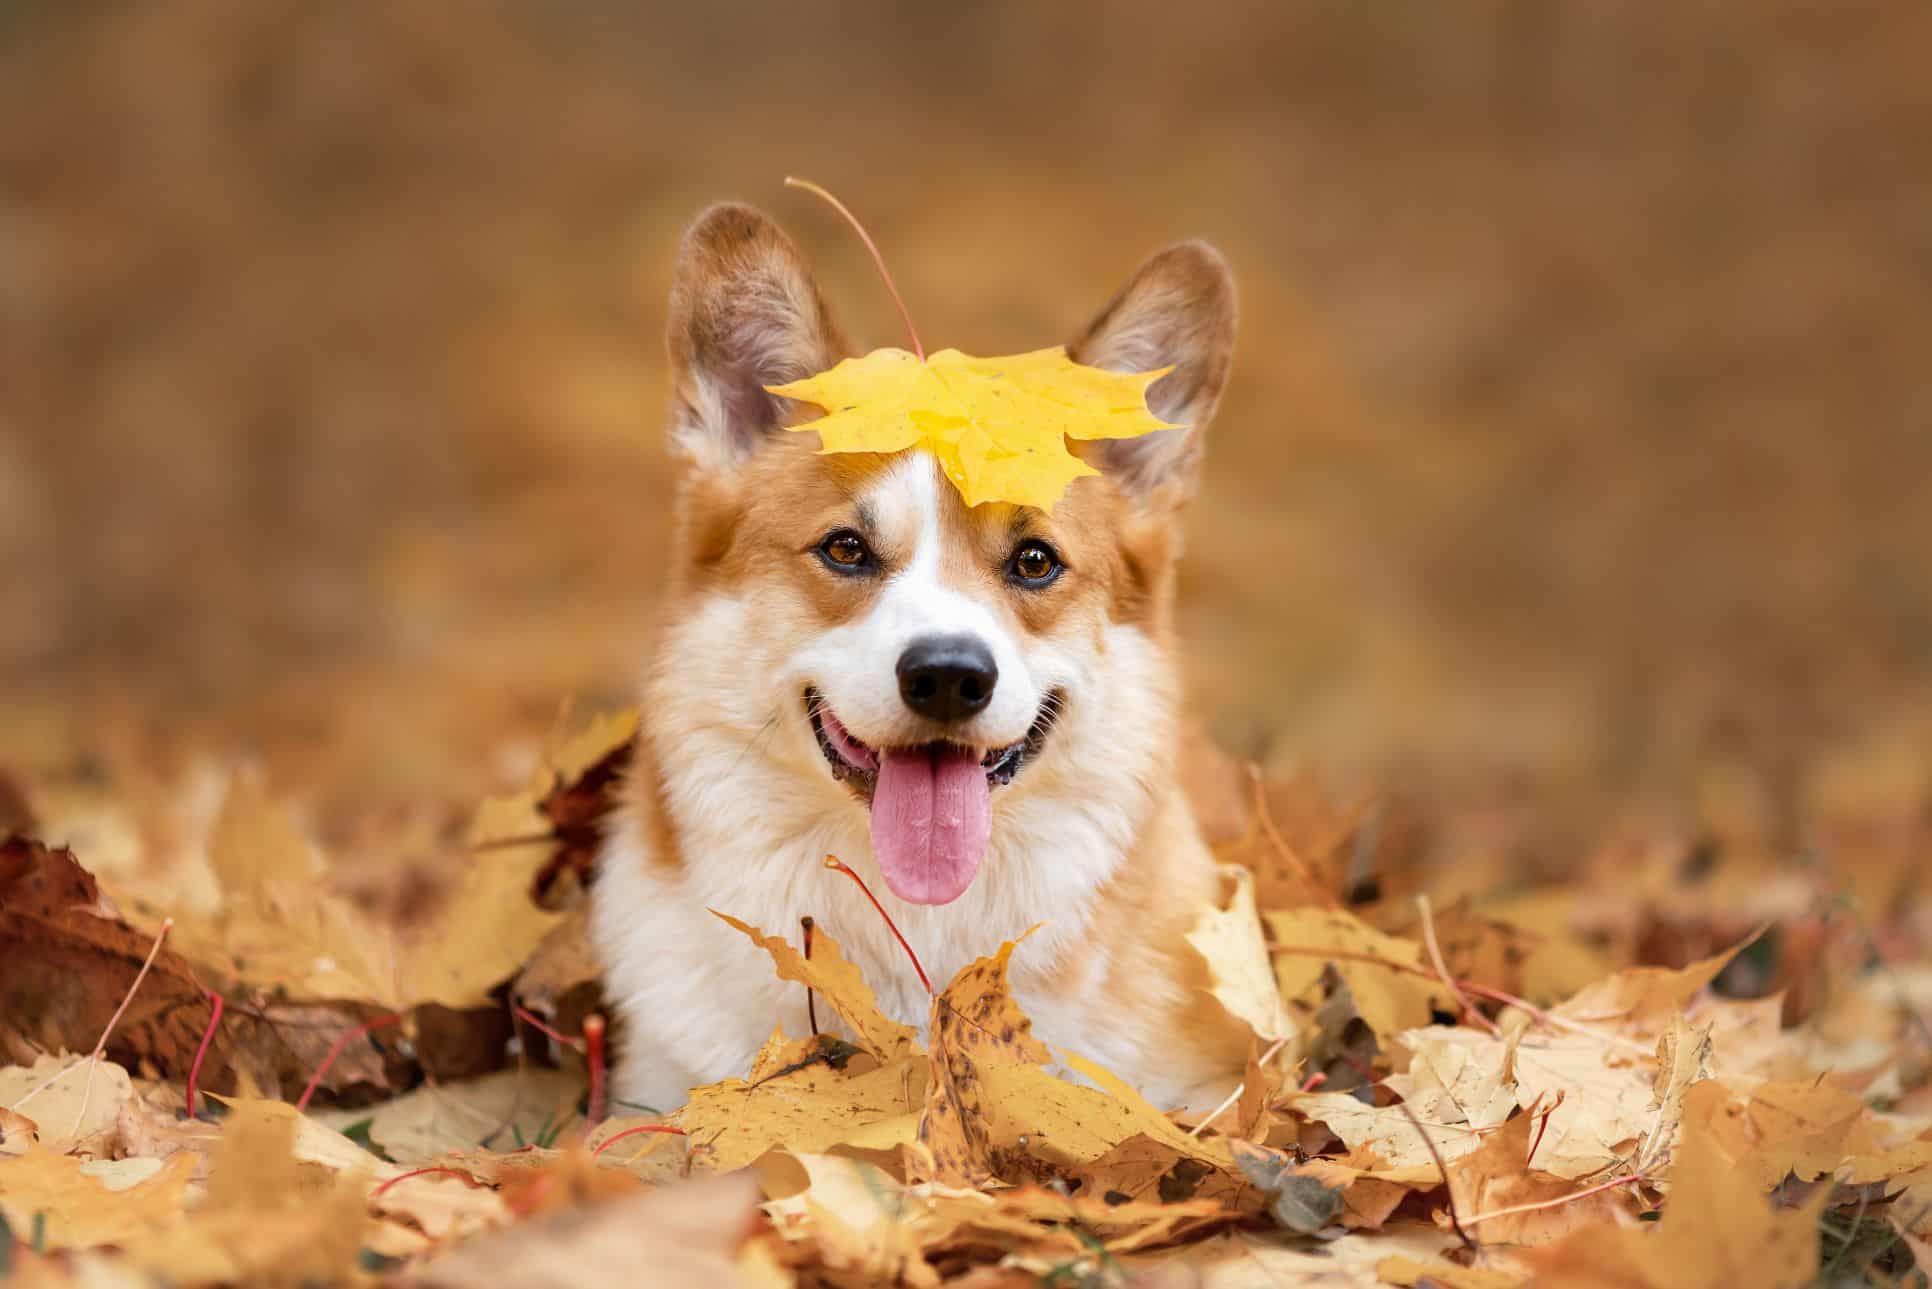 dog in pile of leaves.